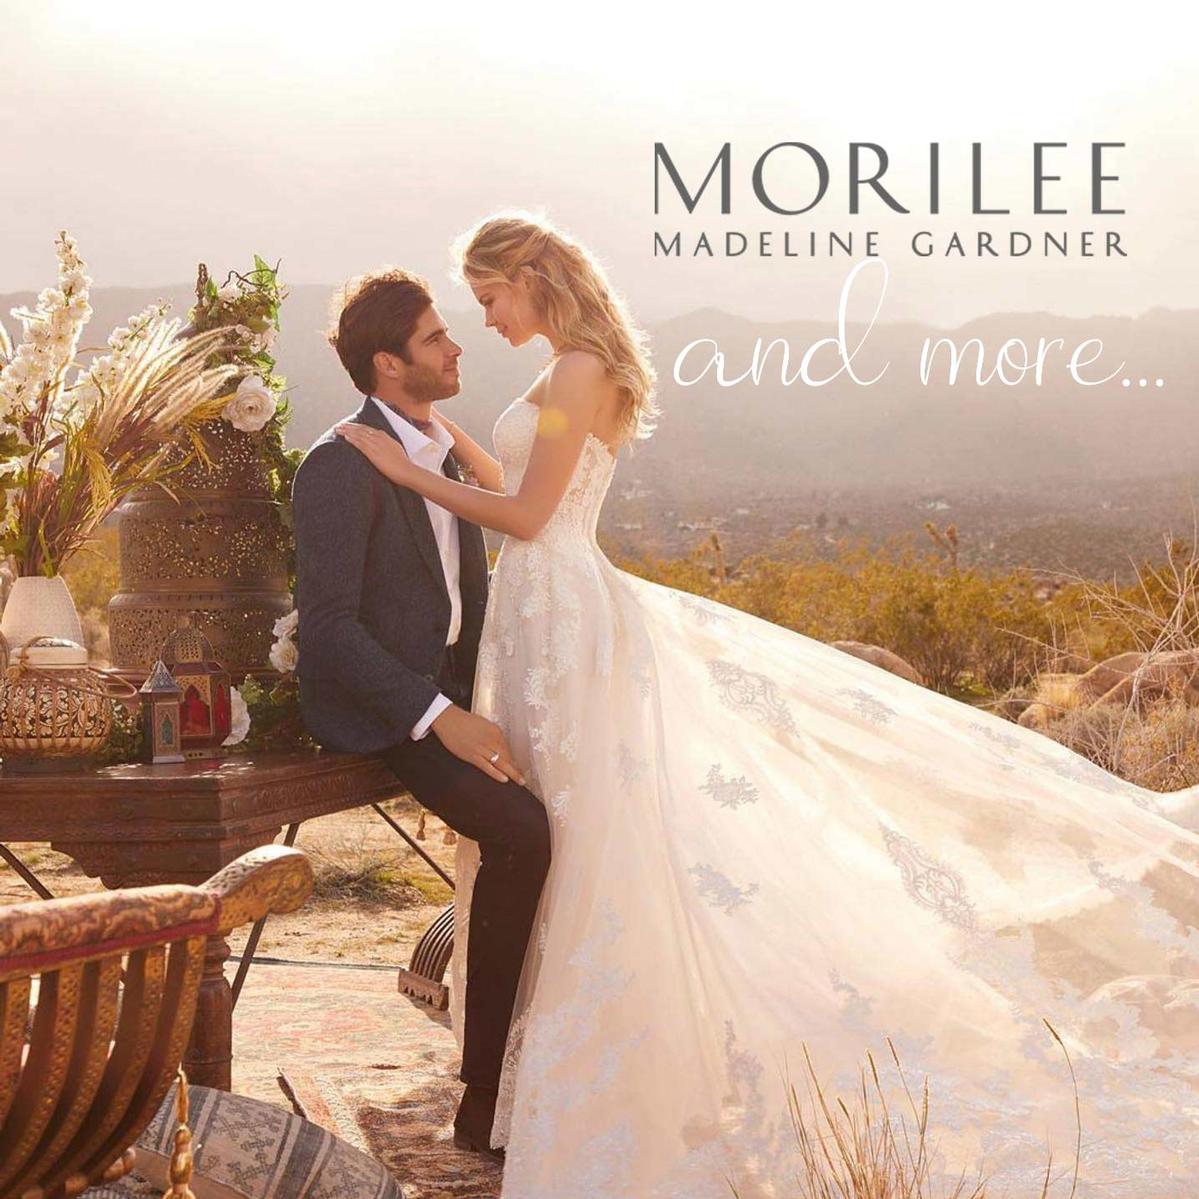 Morilee Bridal Gowns - Your Wedding Place